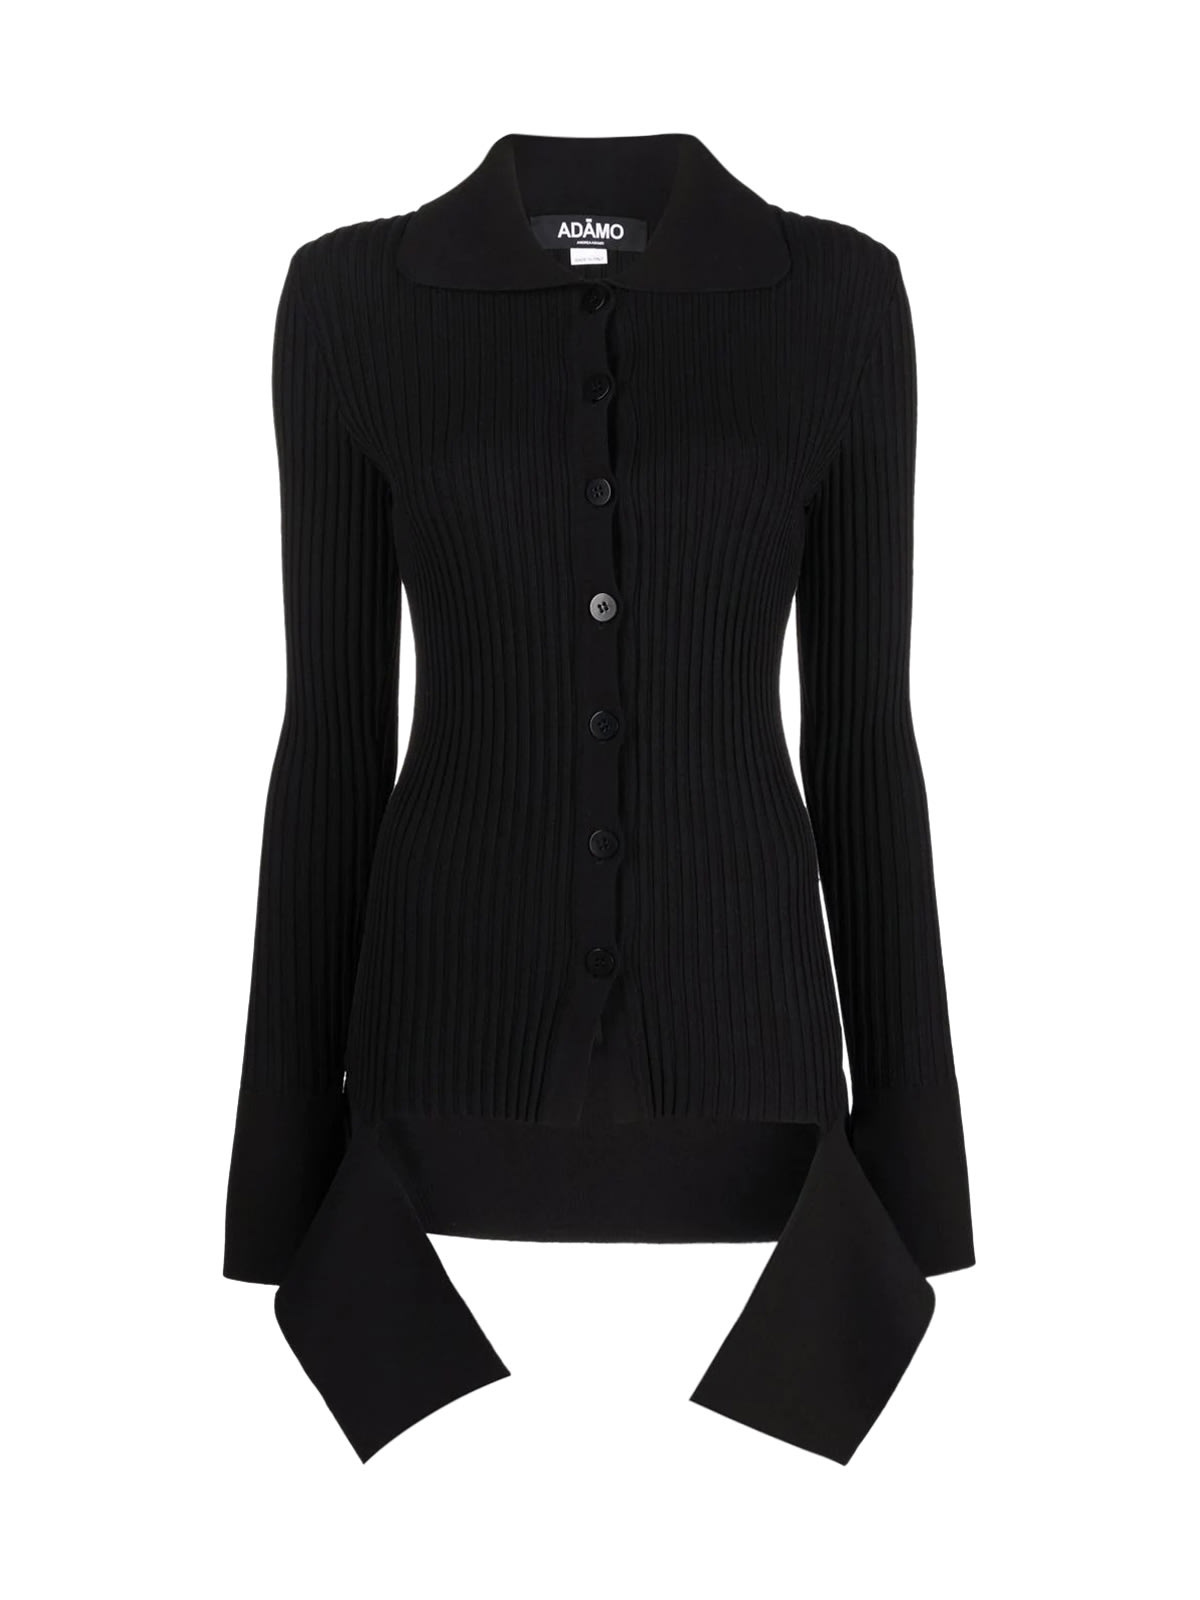 ANDREADAMO Cardigan Long Sleeve With Cut Out Detail